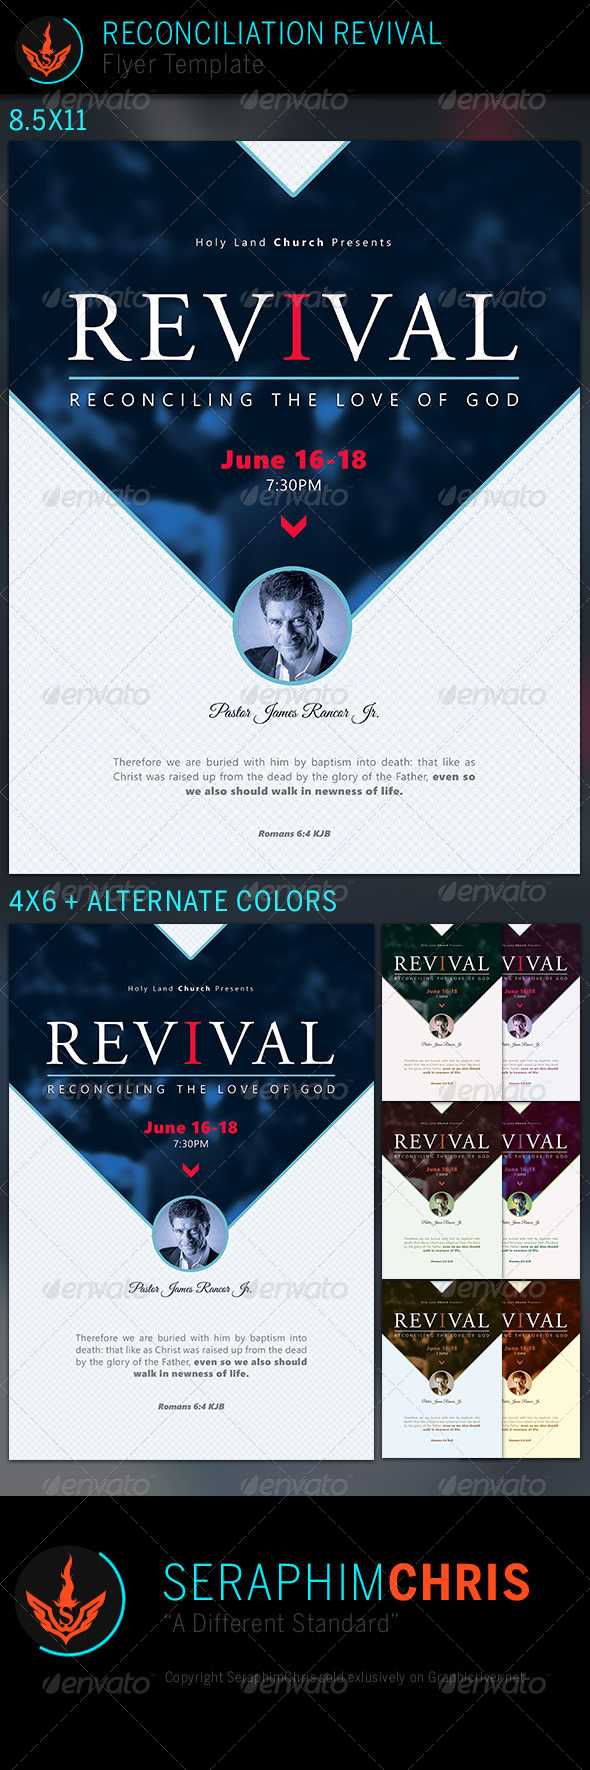 Revival Flyer Graphics, Designs & Templates From Graphicriver Inside Free Church Revival Flyer Template